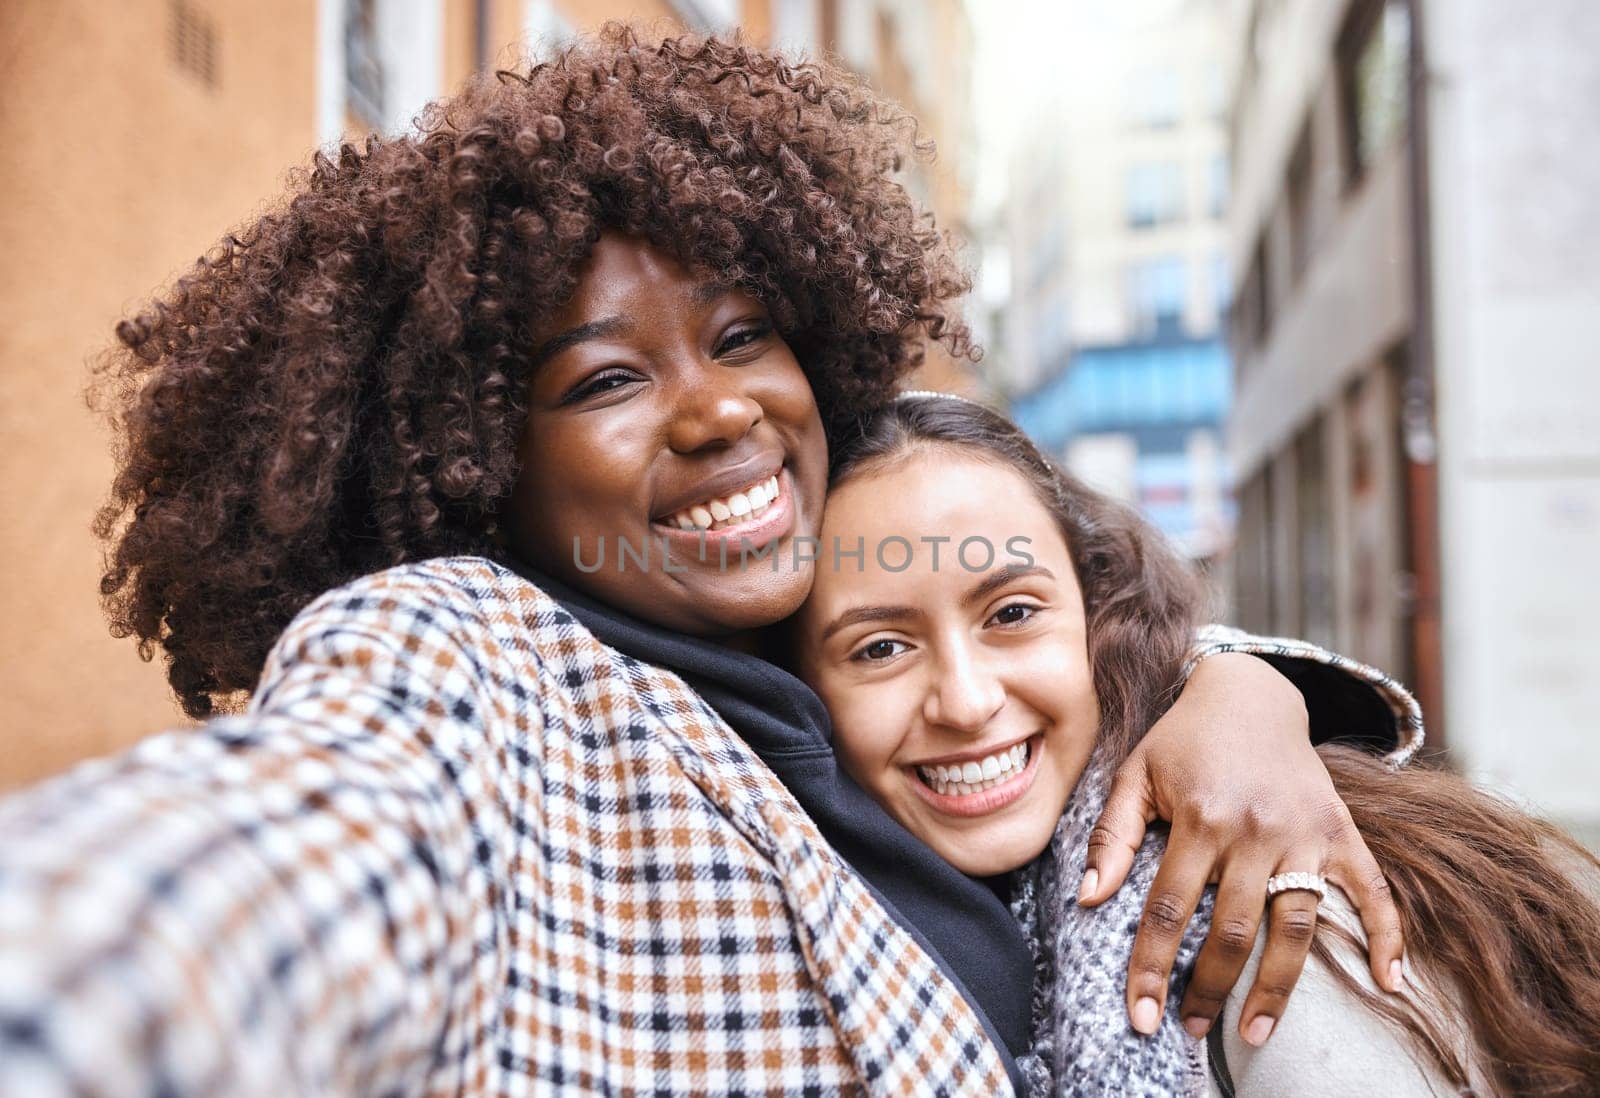 Friendship, happy and portrait of women on a holiday together walking in the city street in Italy. Happiness, smile and interracial female gay couple hugging in the road in town while on a vacation